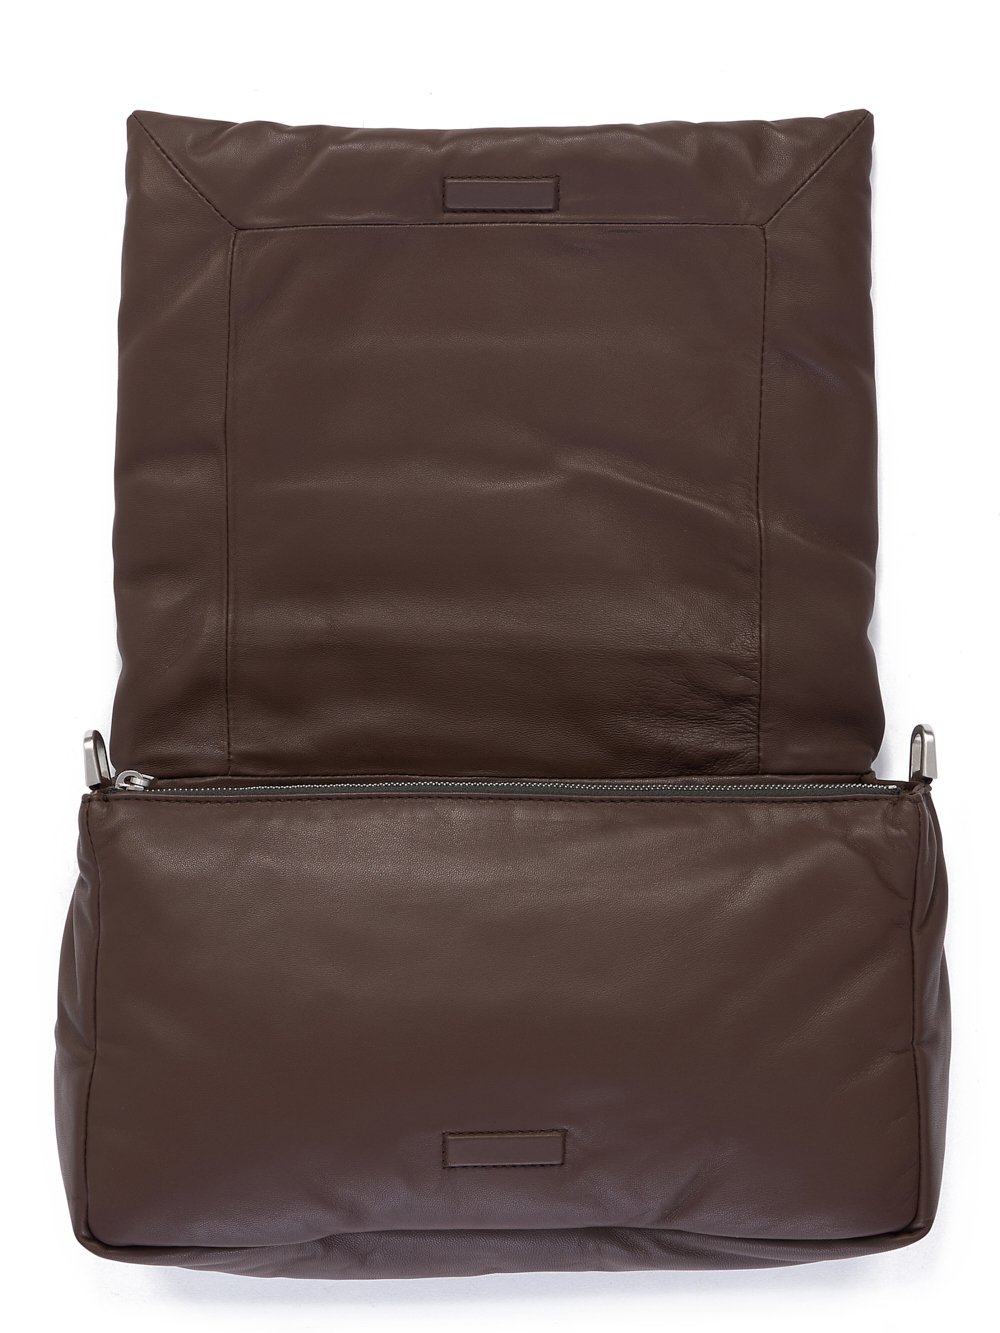 RICK OWENS FW23 LUXOR BIG PILLOW GRIFFIN IN BROWN PEACHED LAMBSKIN